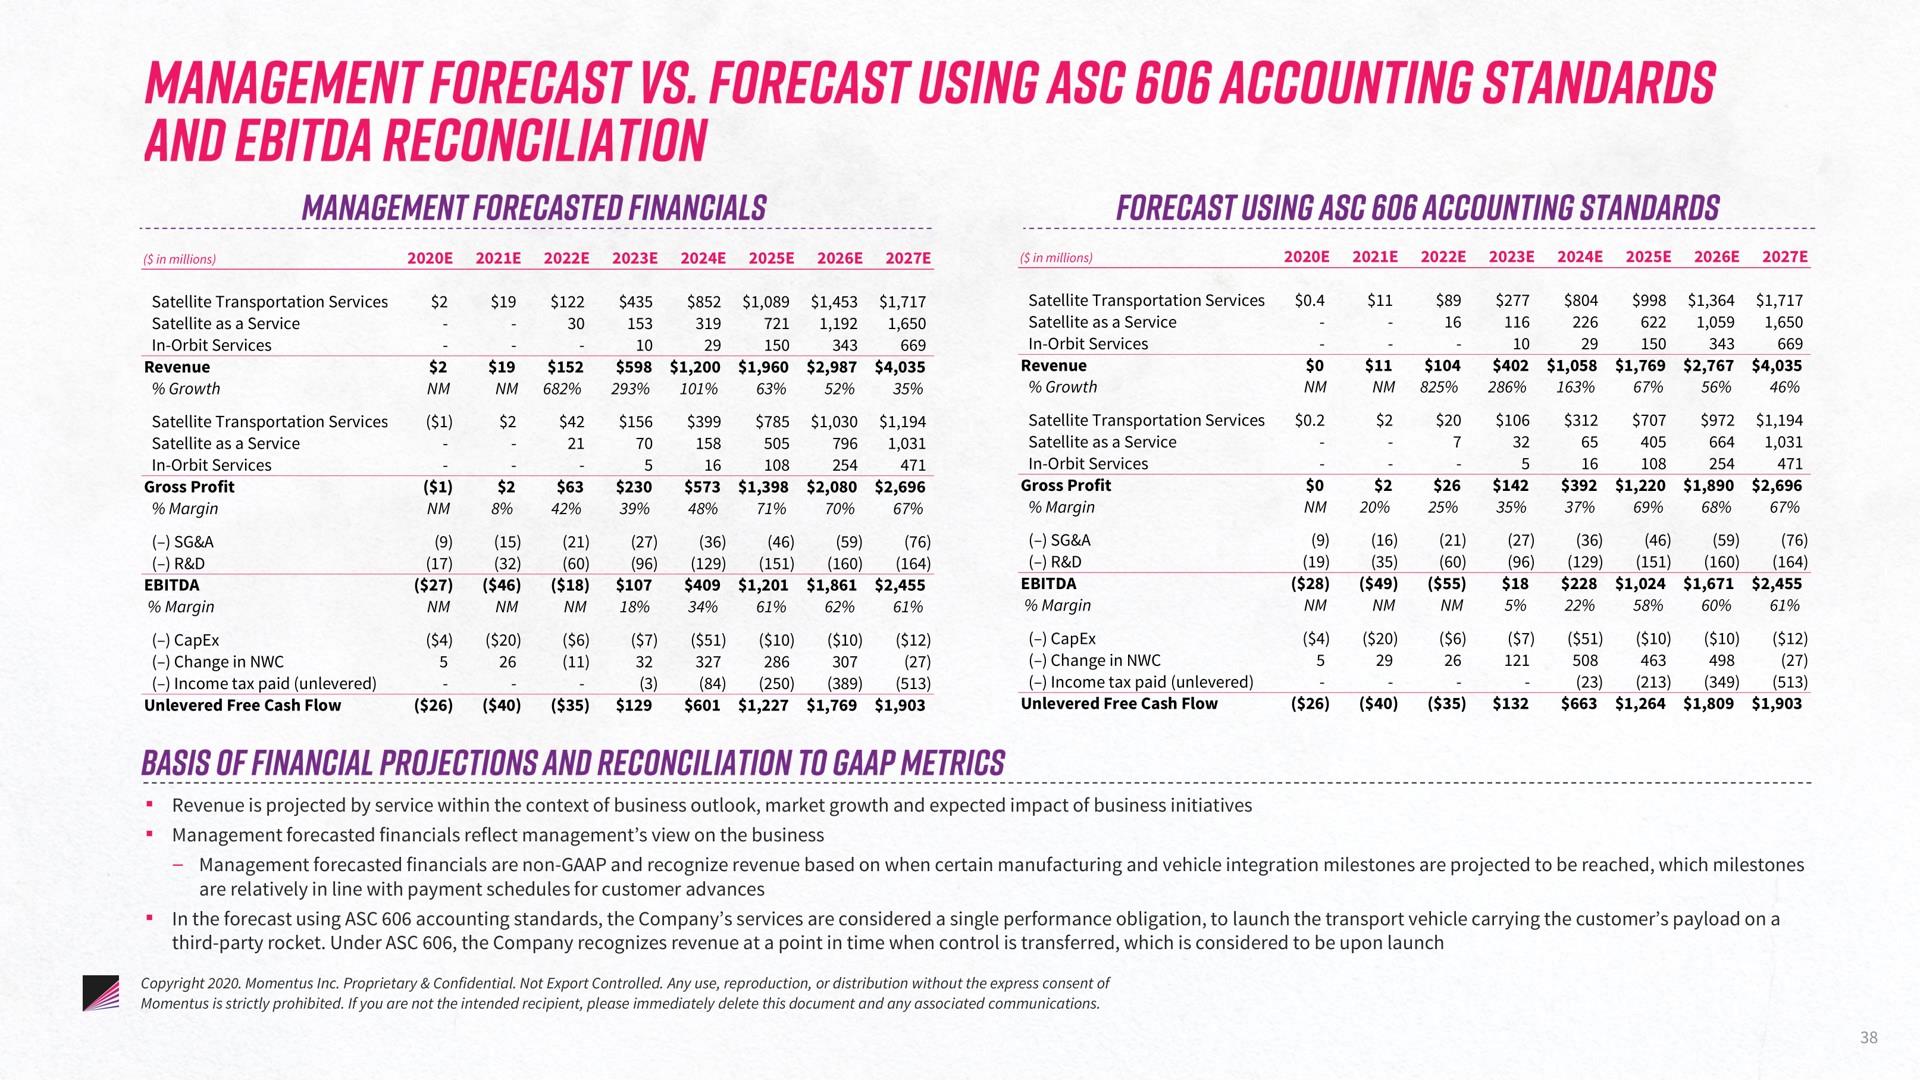 management forecast forecast using accounting standards and reconciliation | Momentus